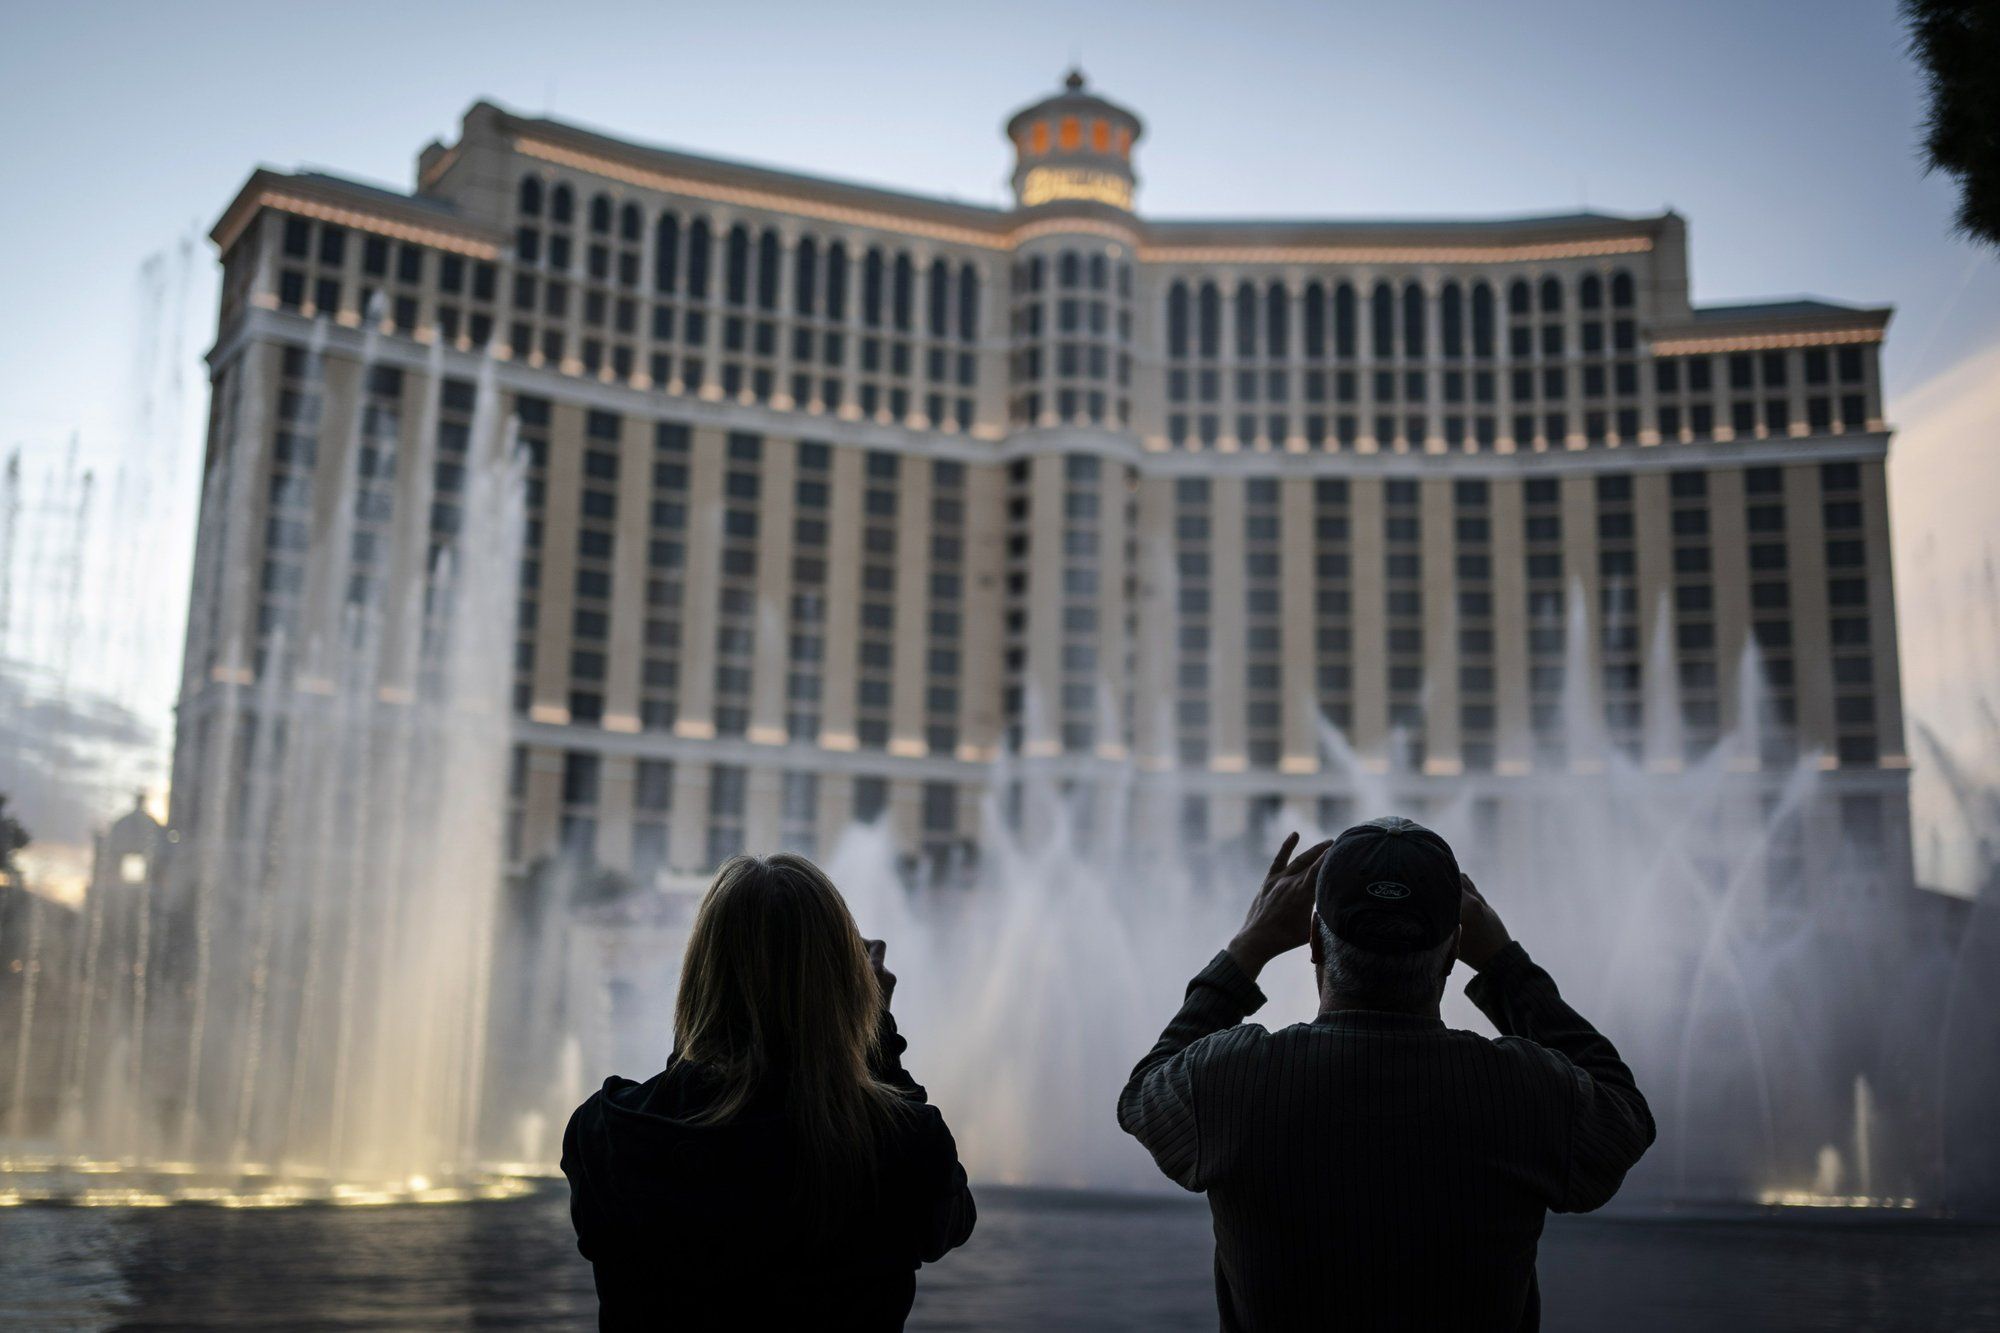 People are silhouetted as they take photos of the fountains at the Bellagio hotel-casino along the Las Vegas Strip, Wednesday, Nov. 11, 2020. Image by Wong Maye-E / AP Photo. United States, 2020.